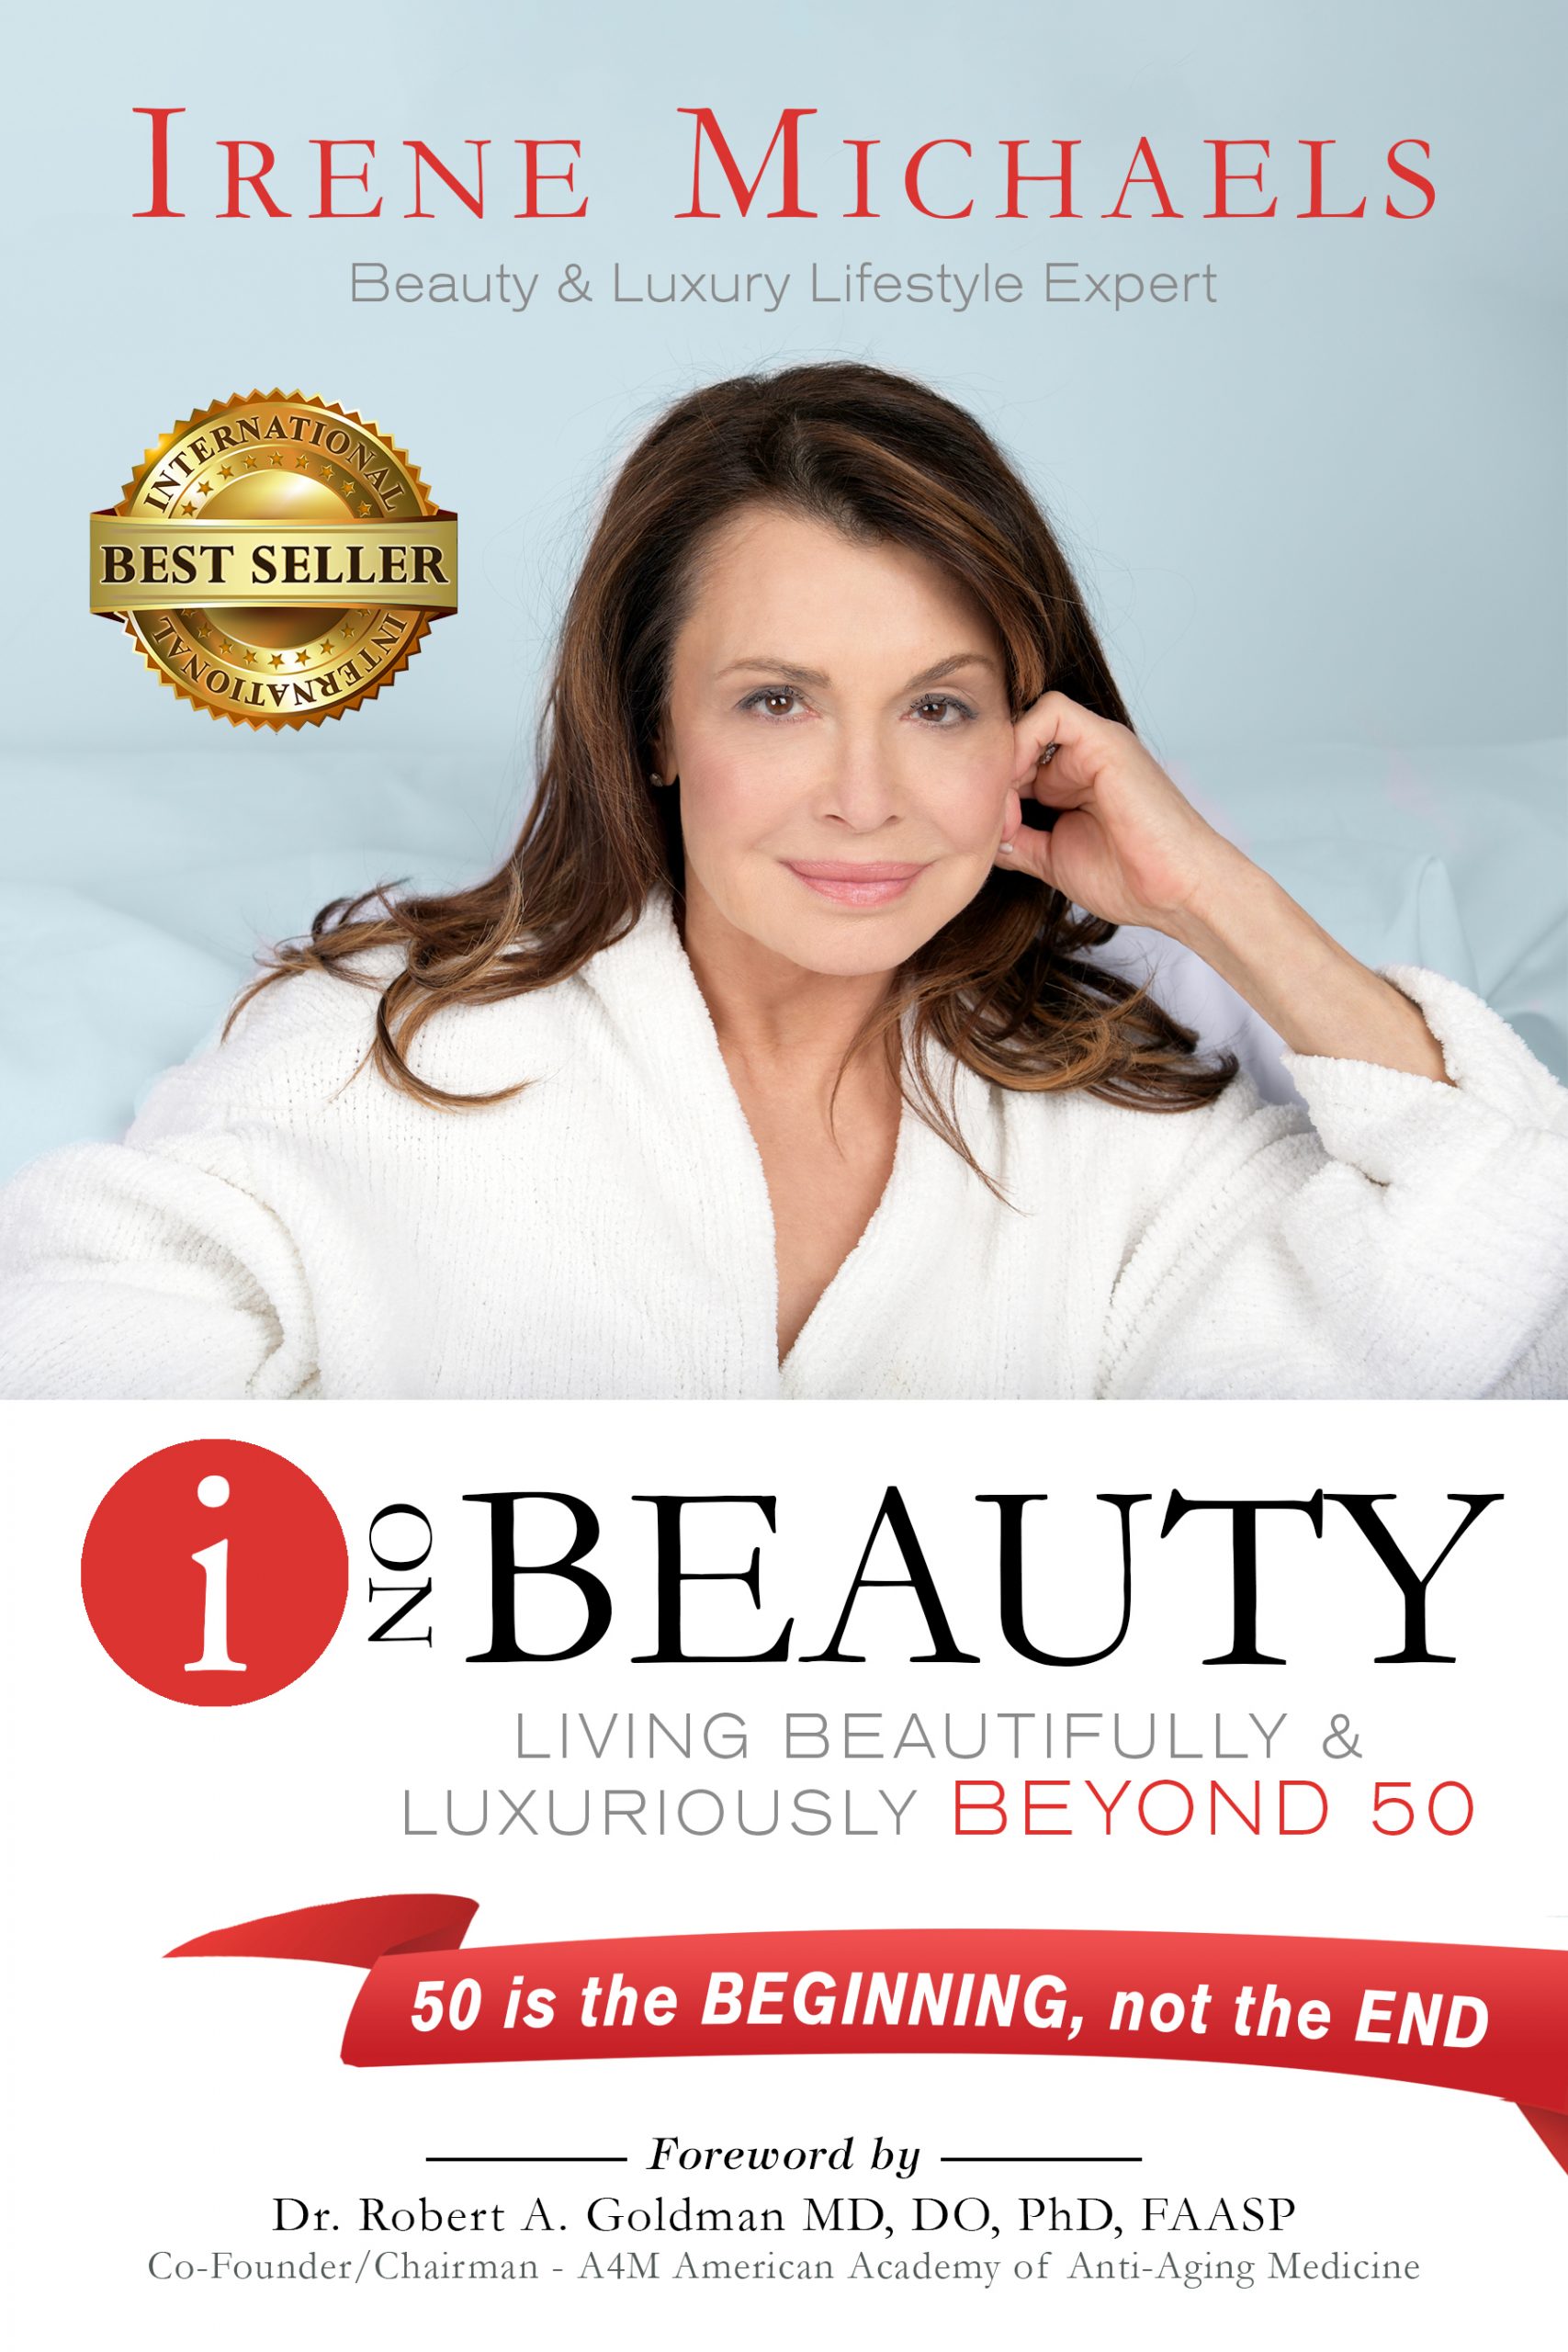 “I On Beauty: Living Beautifully and Luxuriously Beyond 50” By Irene Michaels Available on Amazon